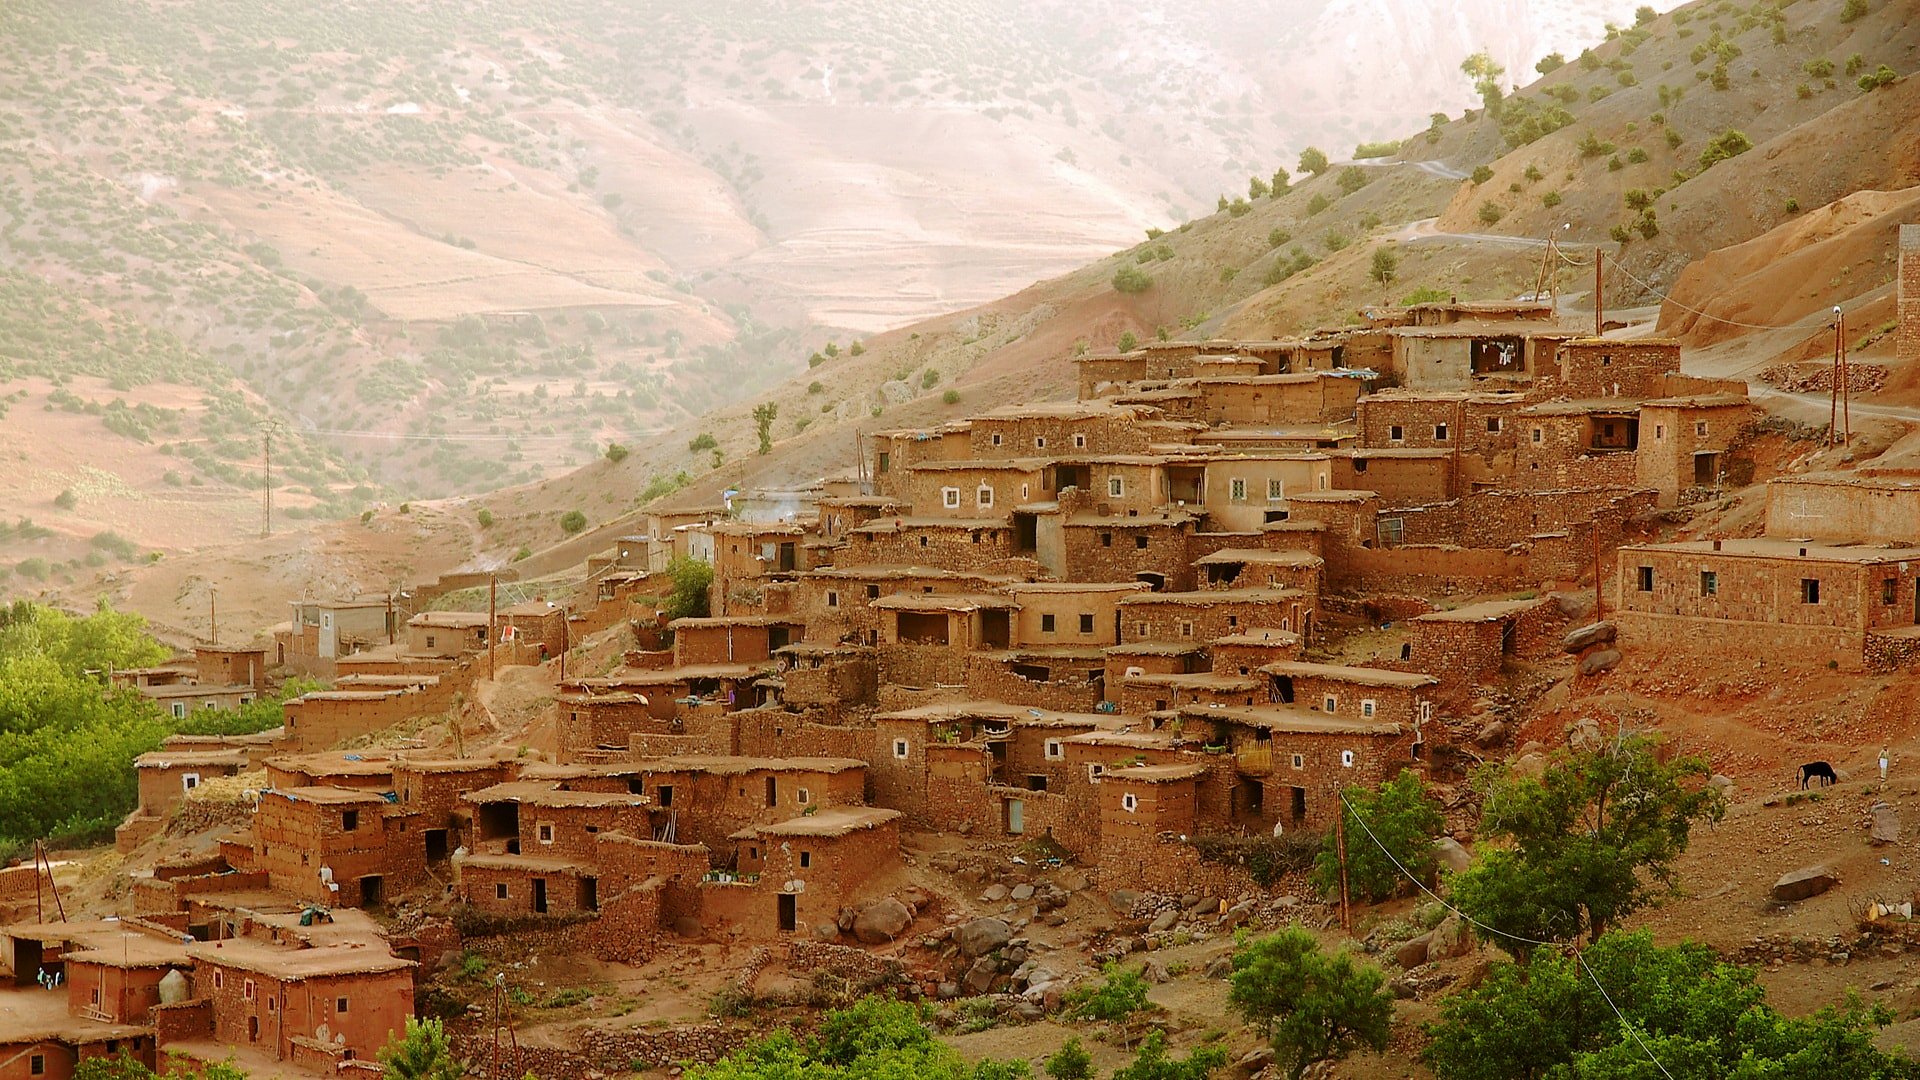 Morocco day trip to Atlas Mountains from Marrakech to explore Berber villages